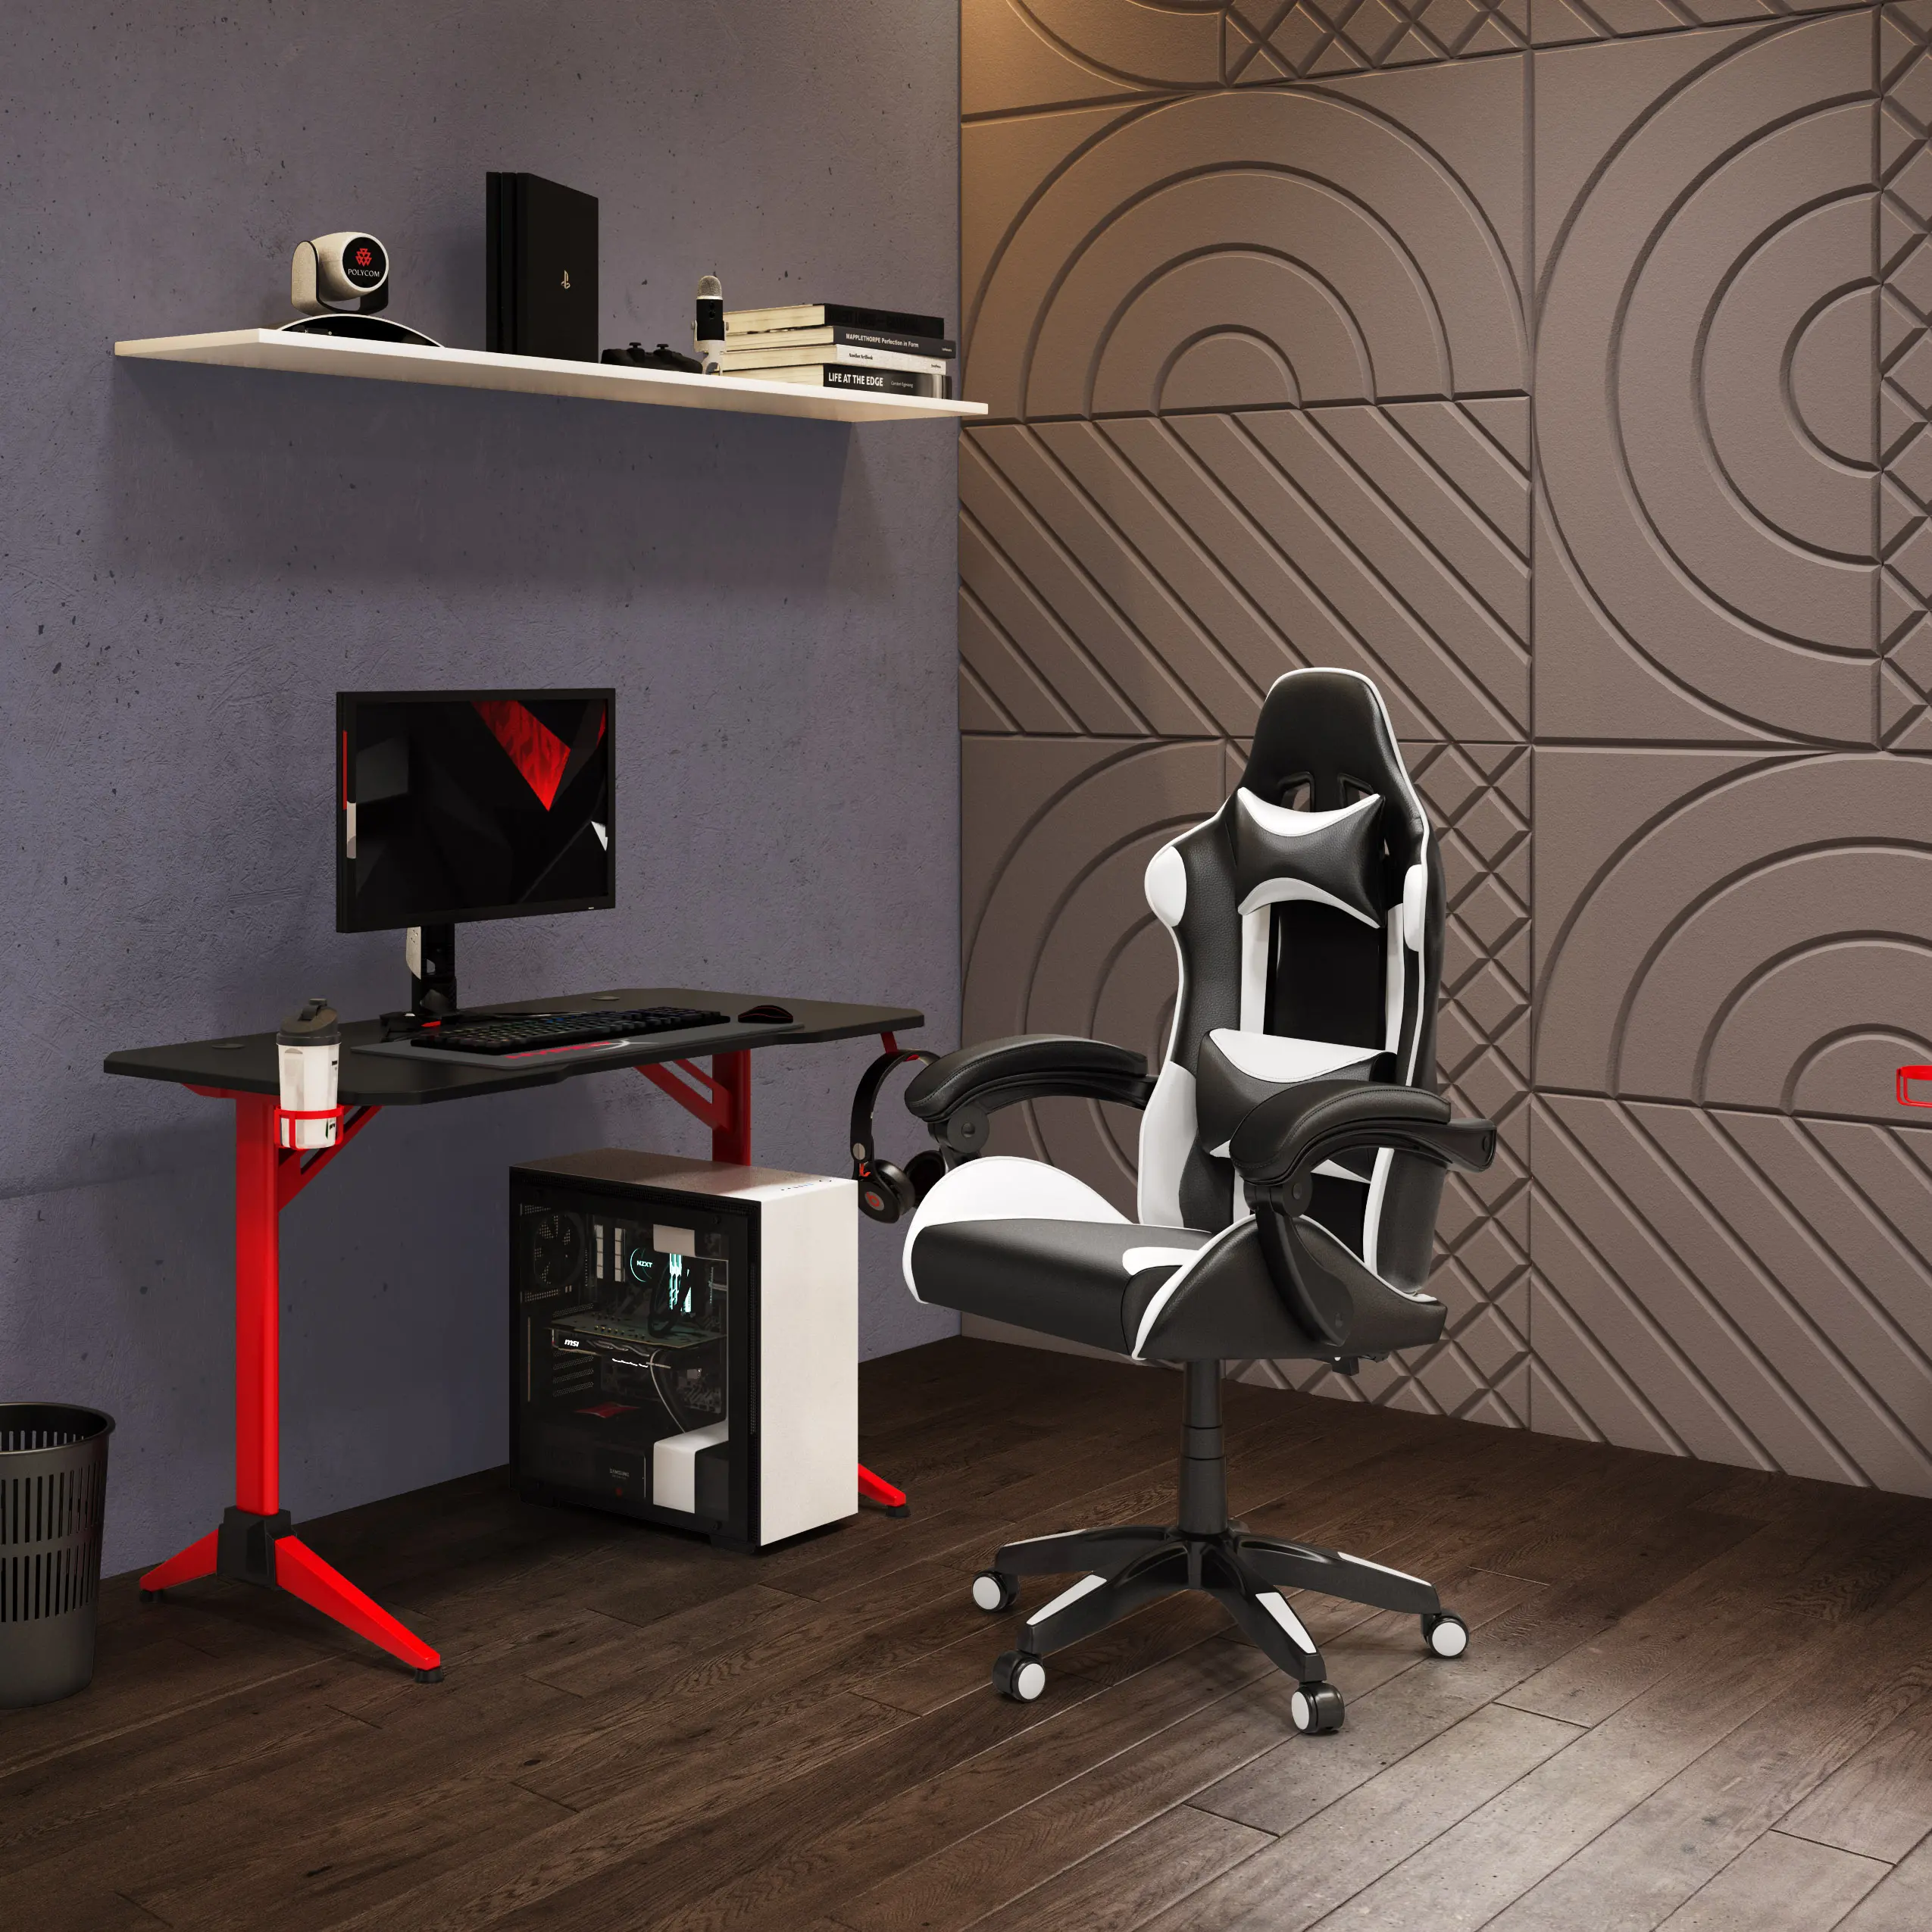 Ravagers Black and White Gaming Chair